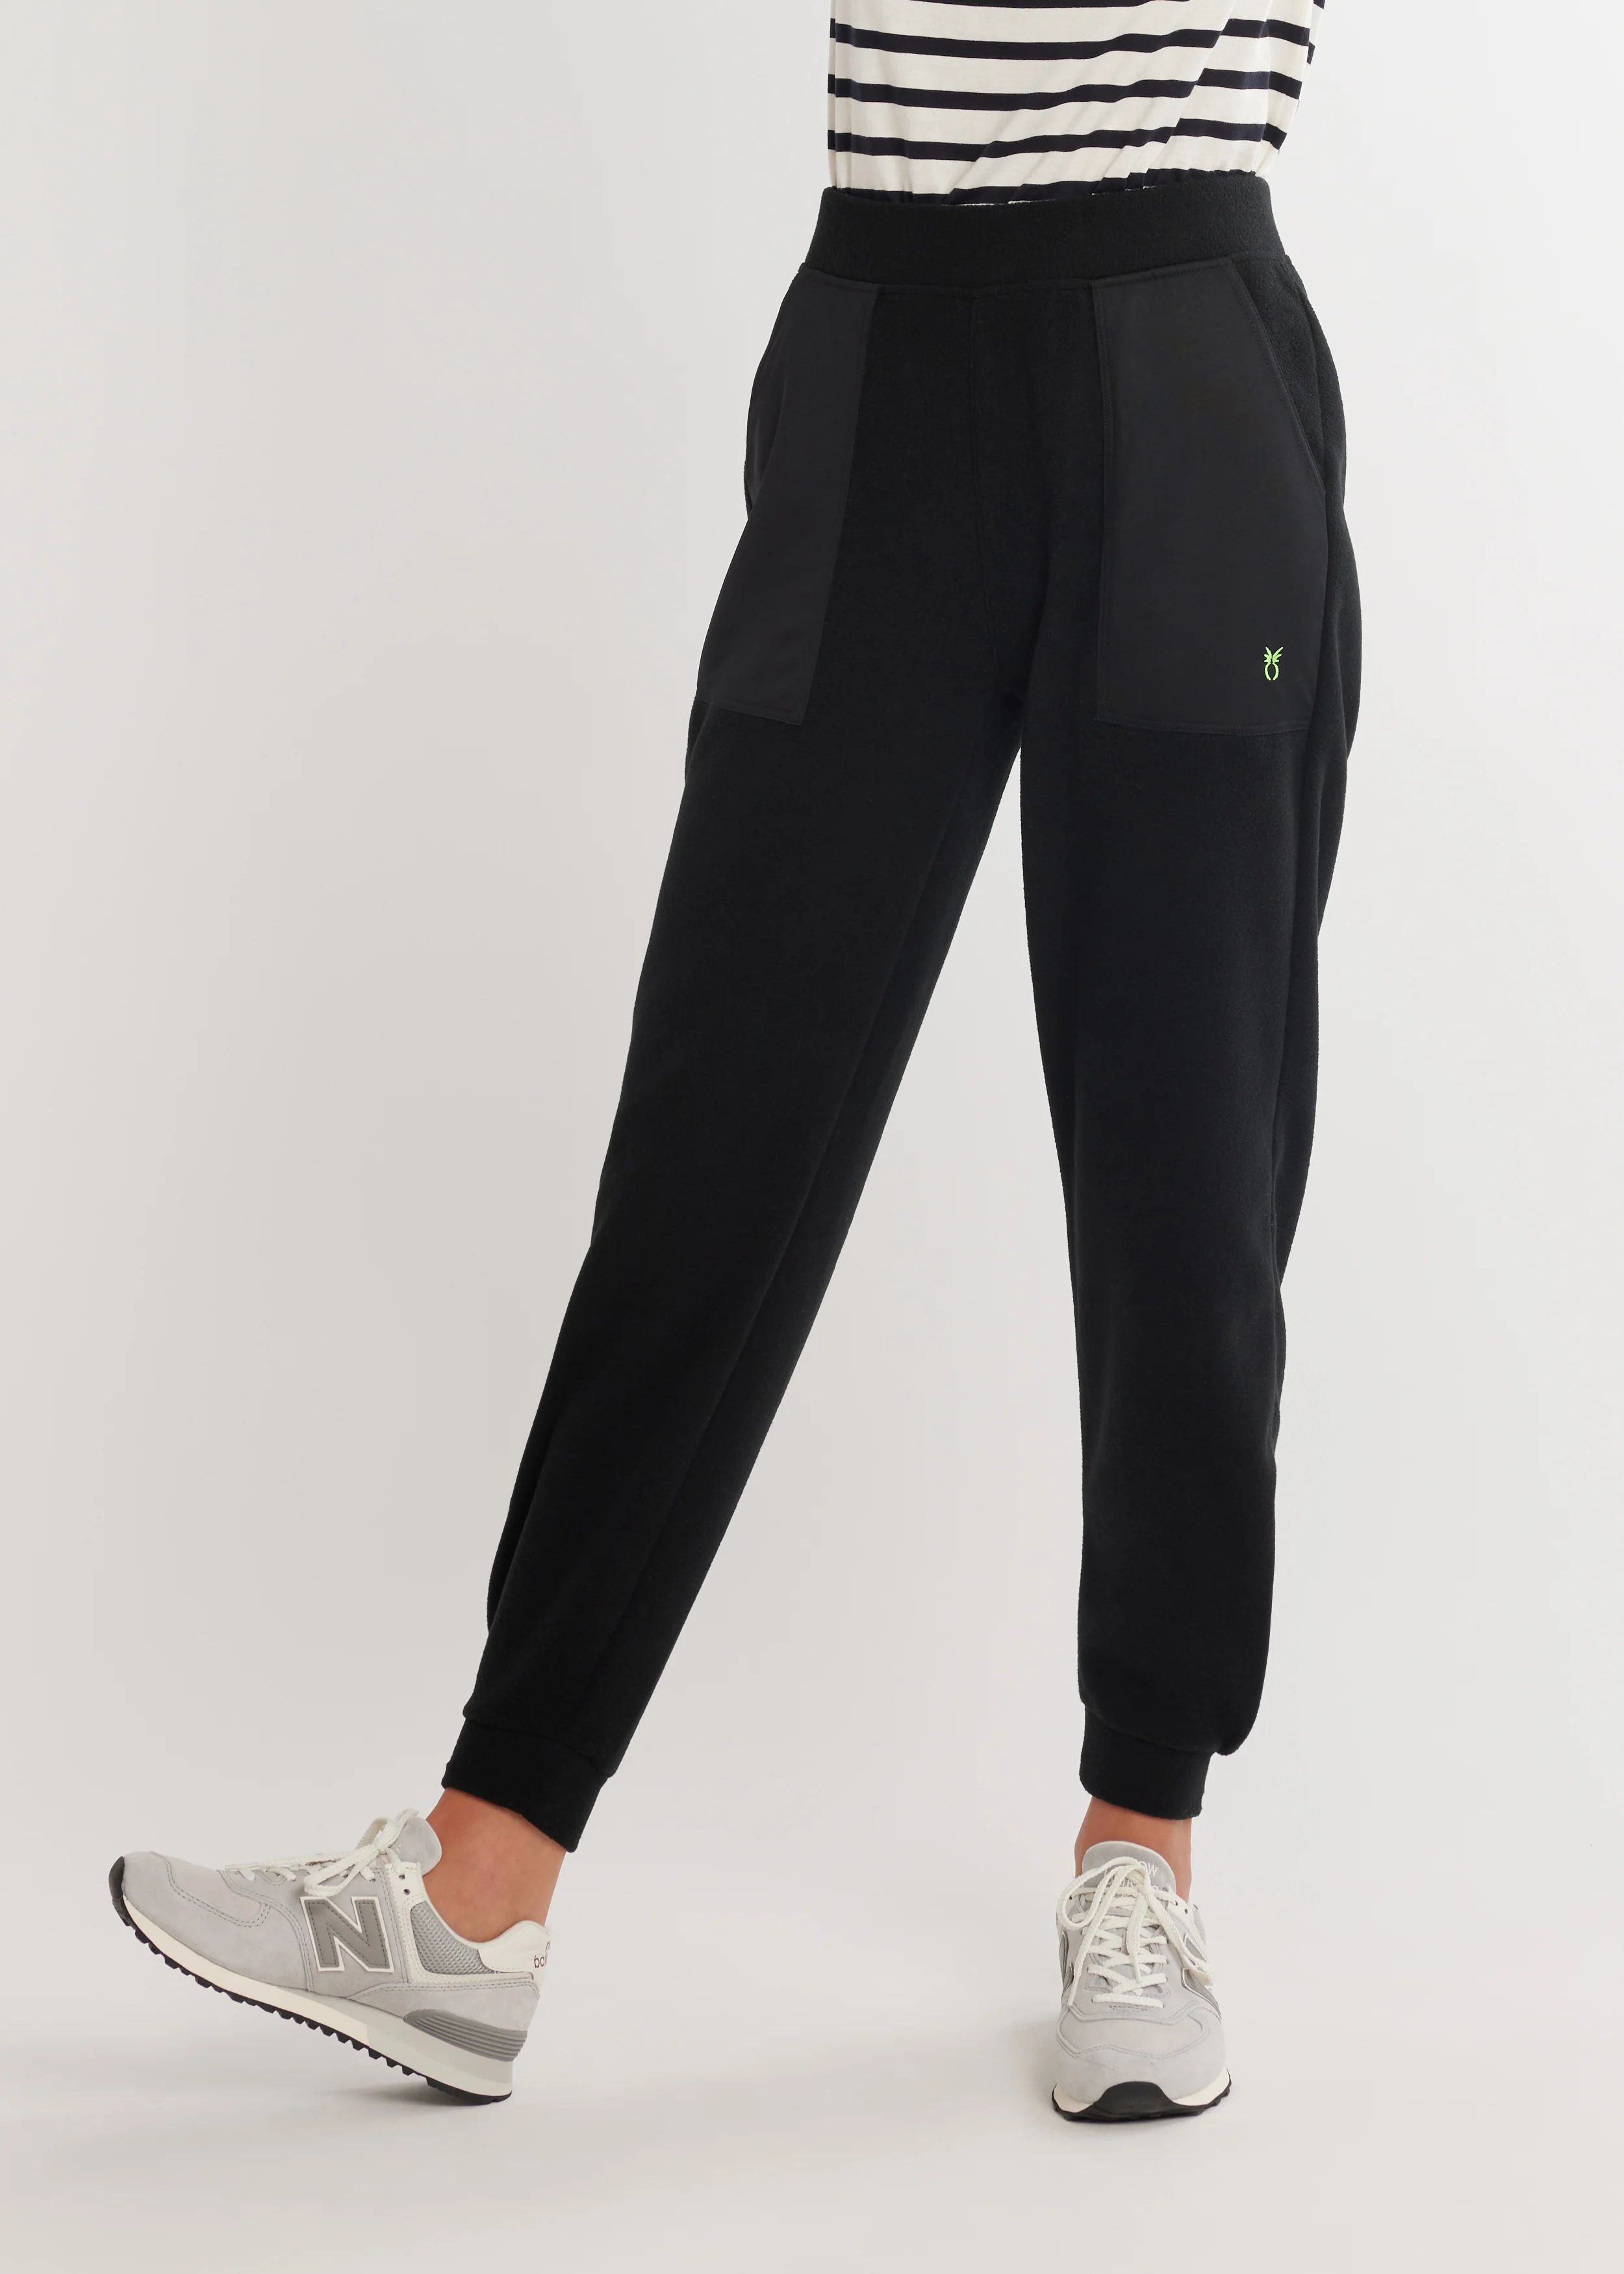 Squall Sweatpant in Vello Fleece (Black) | Dudley Stephens